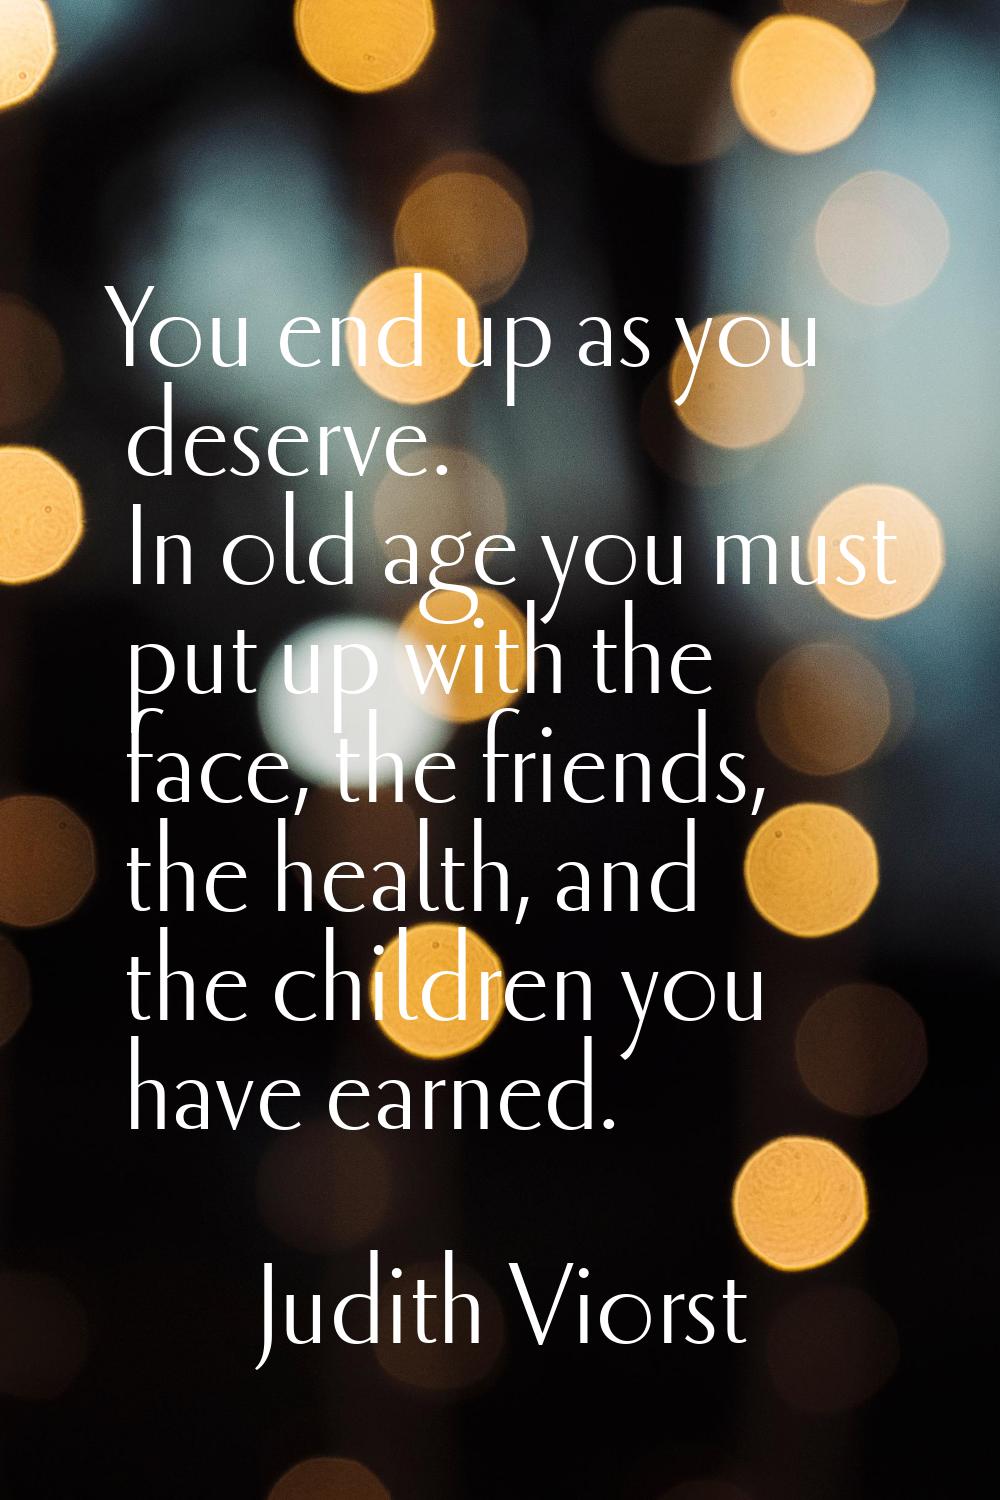 You end up as you deserve. In old age you must put up with the face, the friends, the health, and t